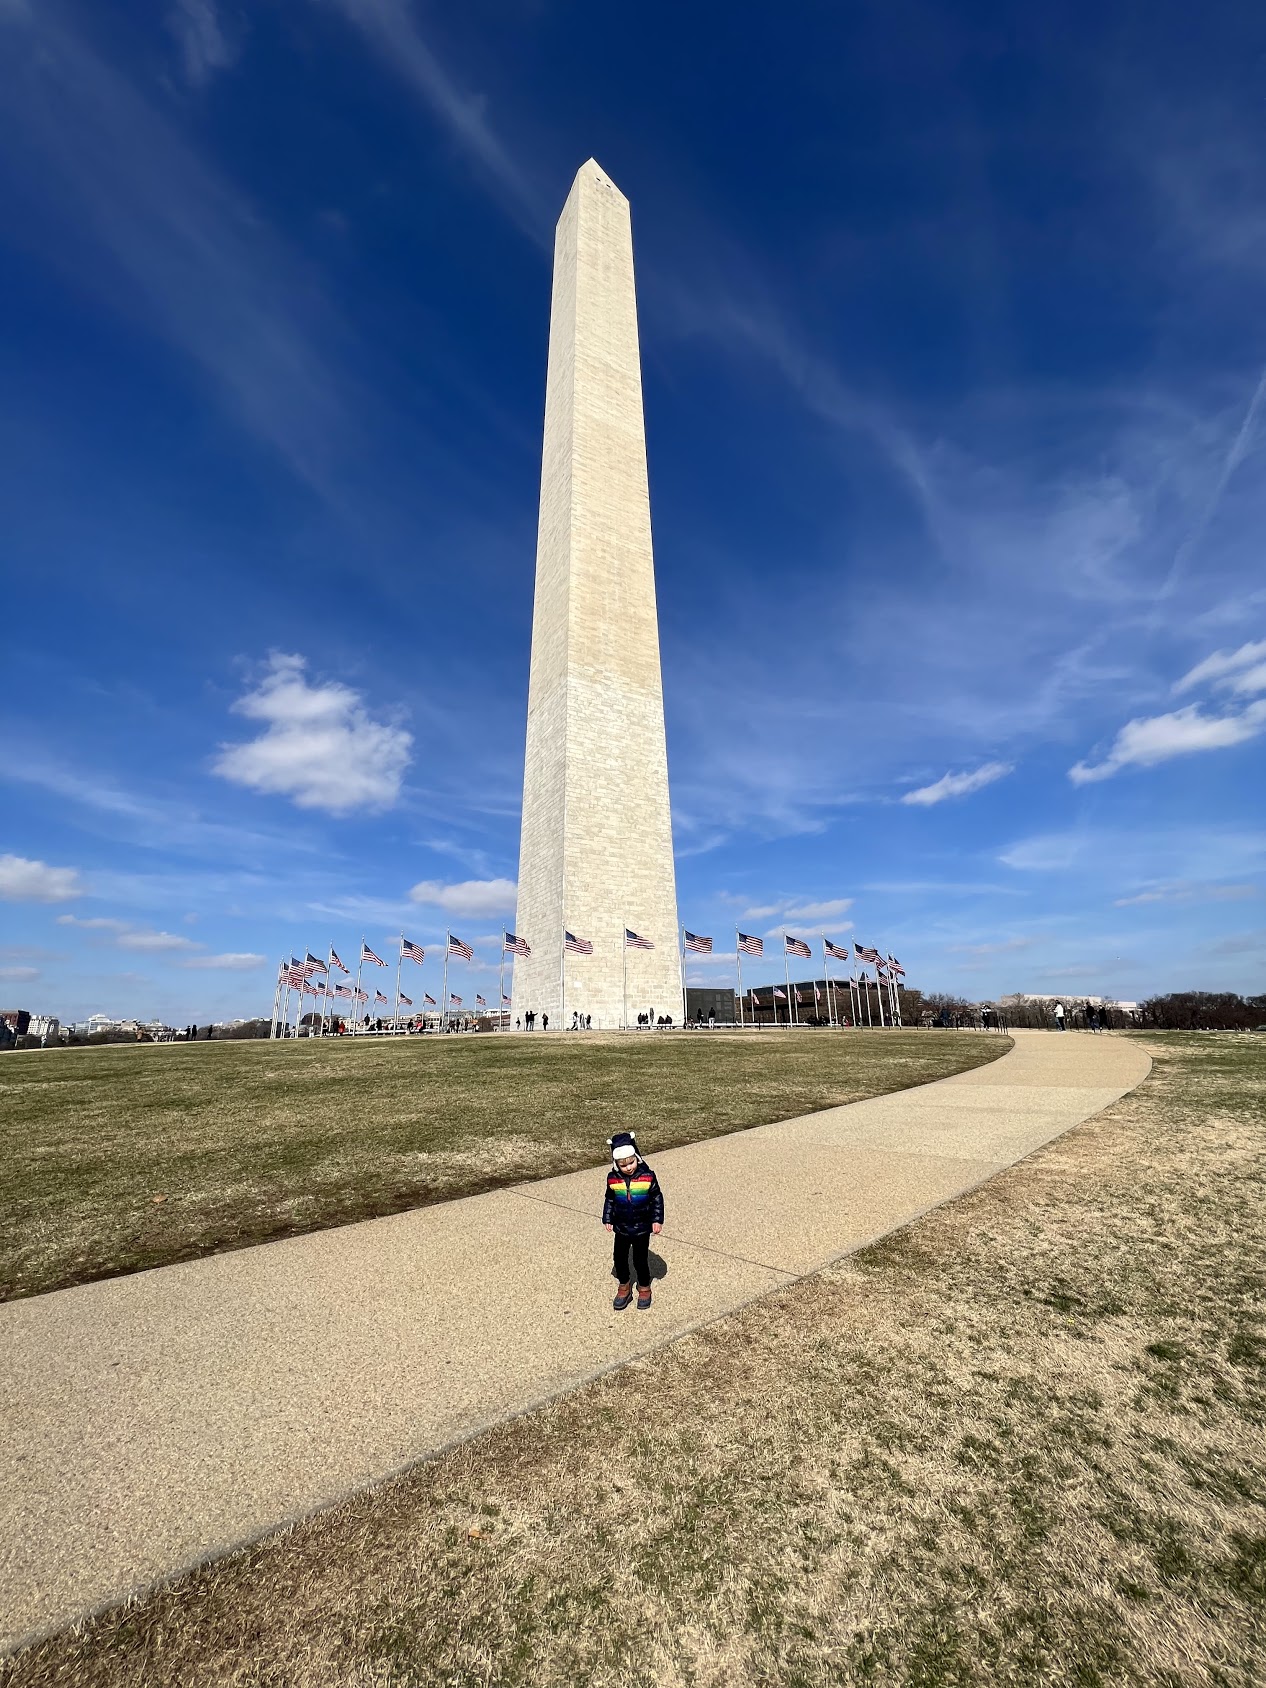 a child standing in front of a tall monument